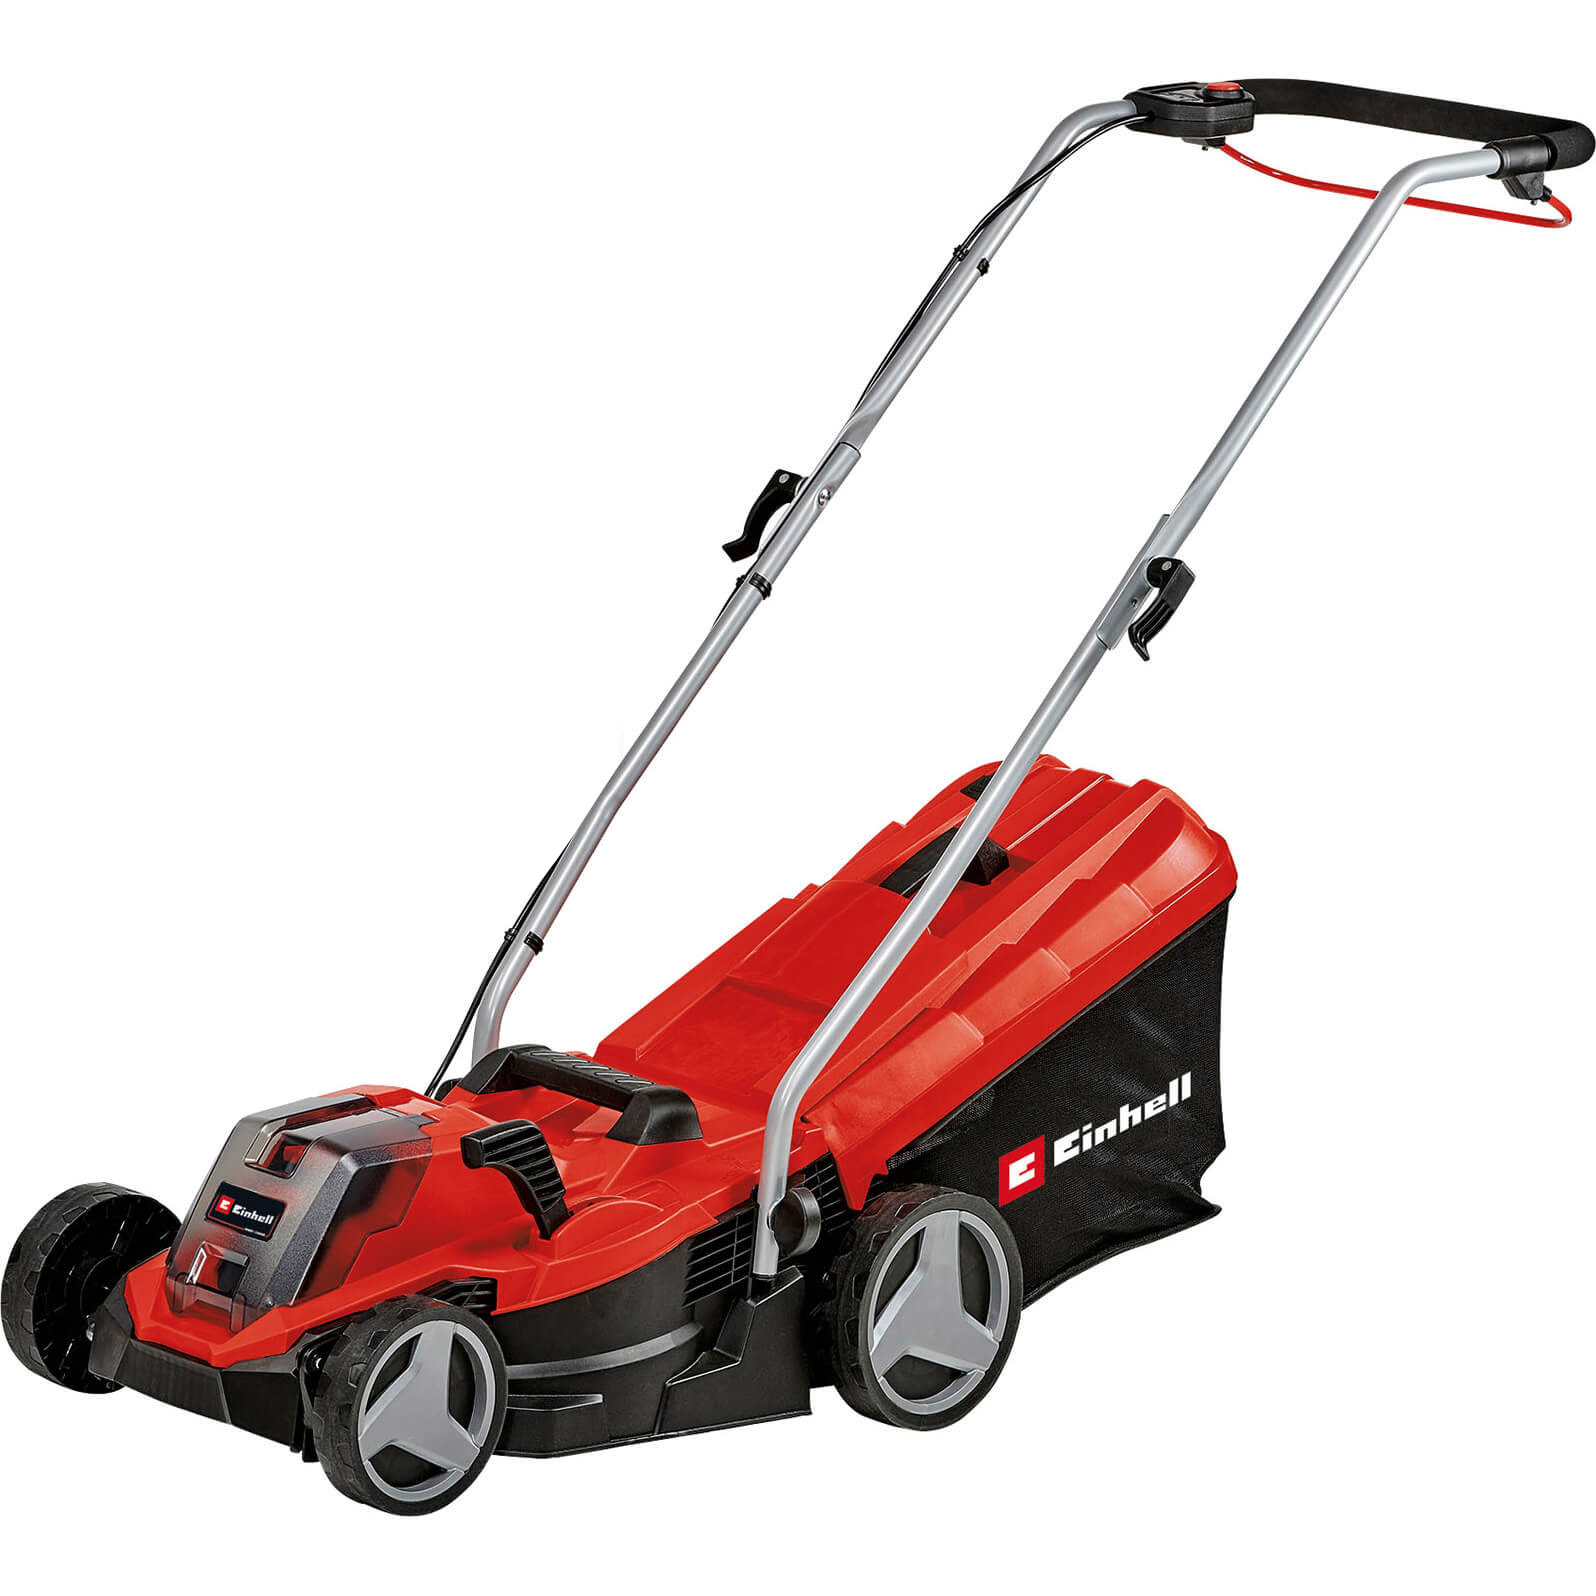 Einhell GE-CM 18/33 Li 18v Cordless Brushless Lawnmower 330mm No Batteries No Charger